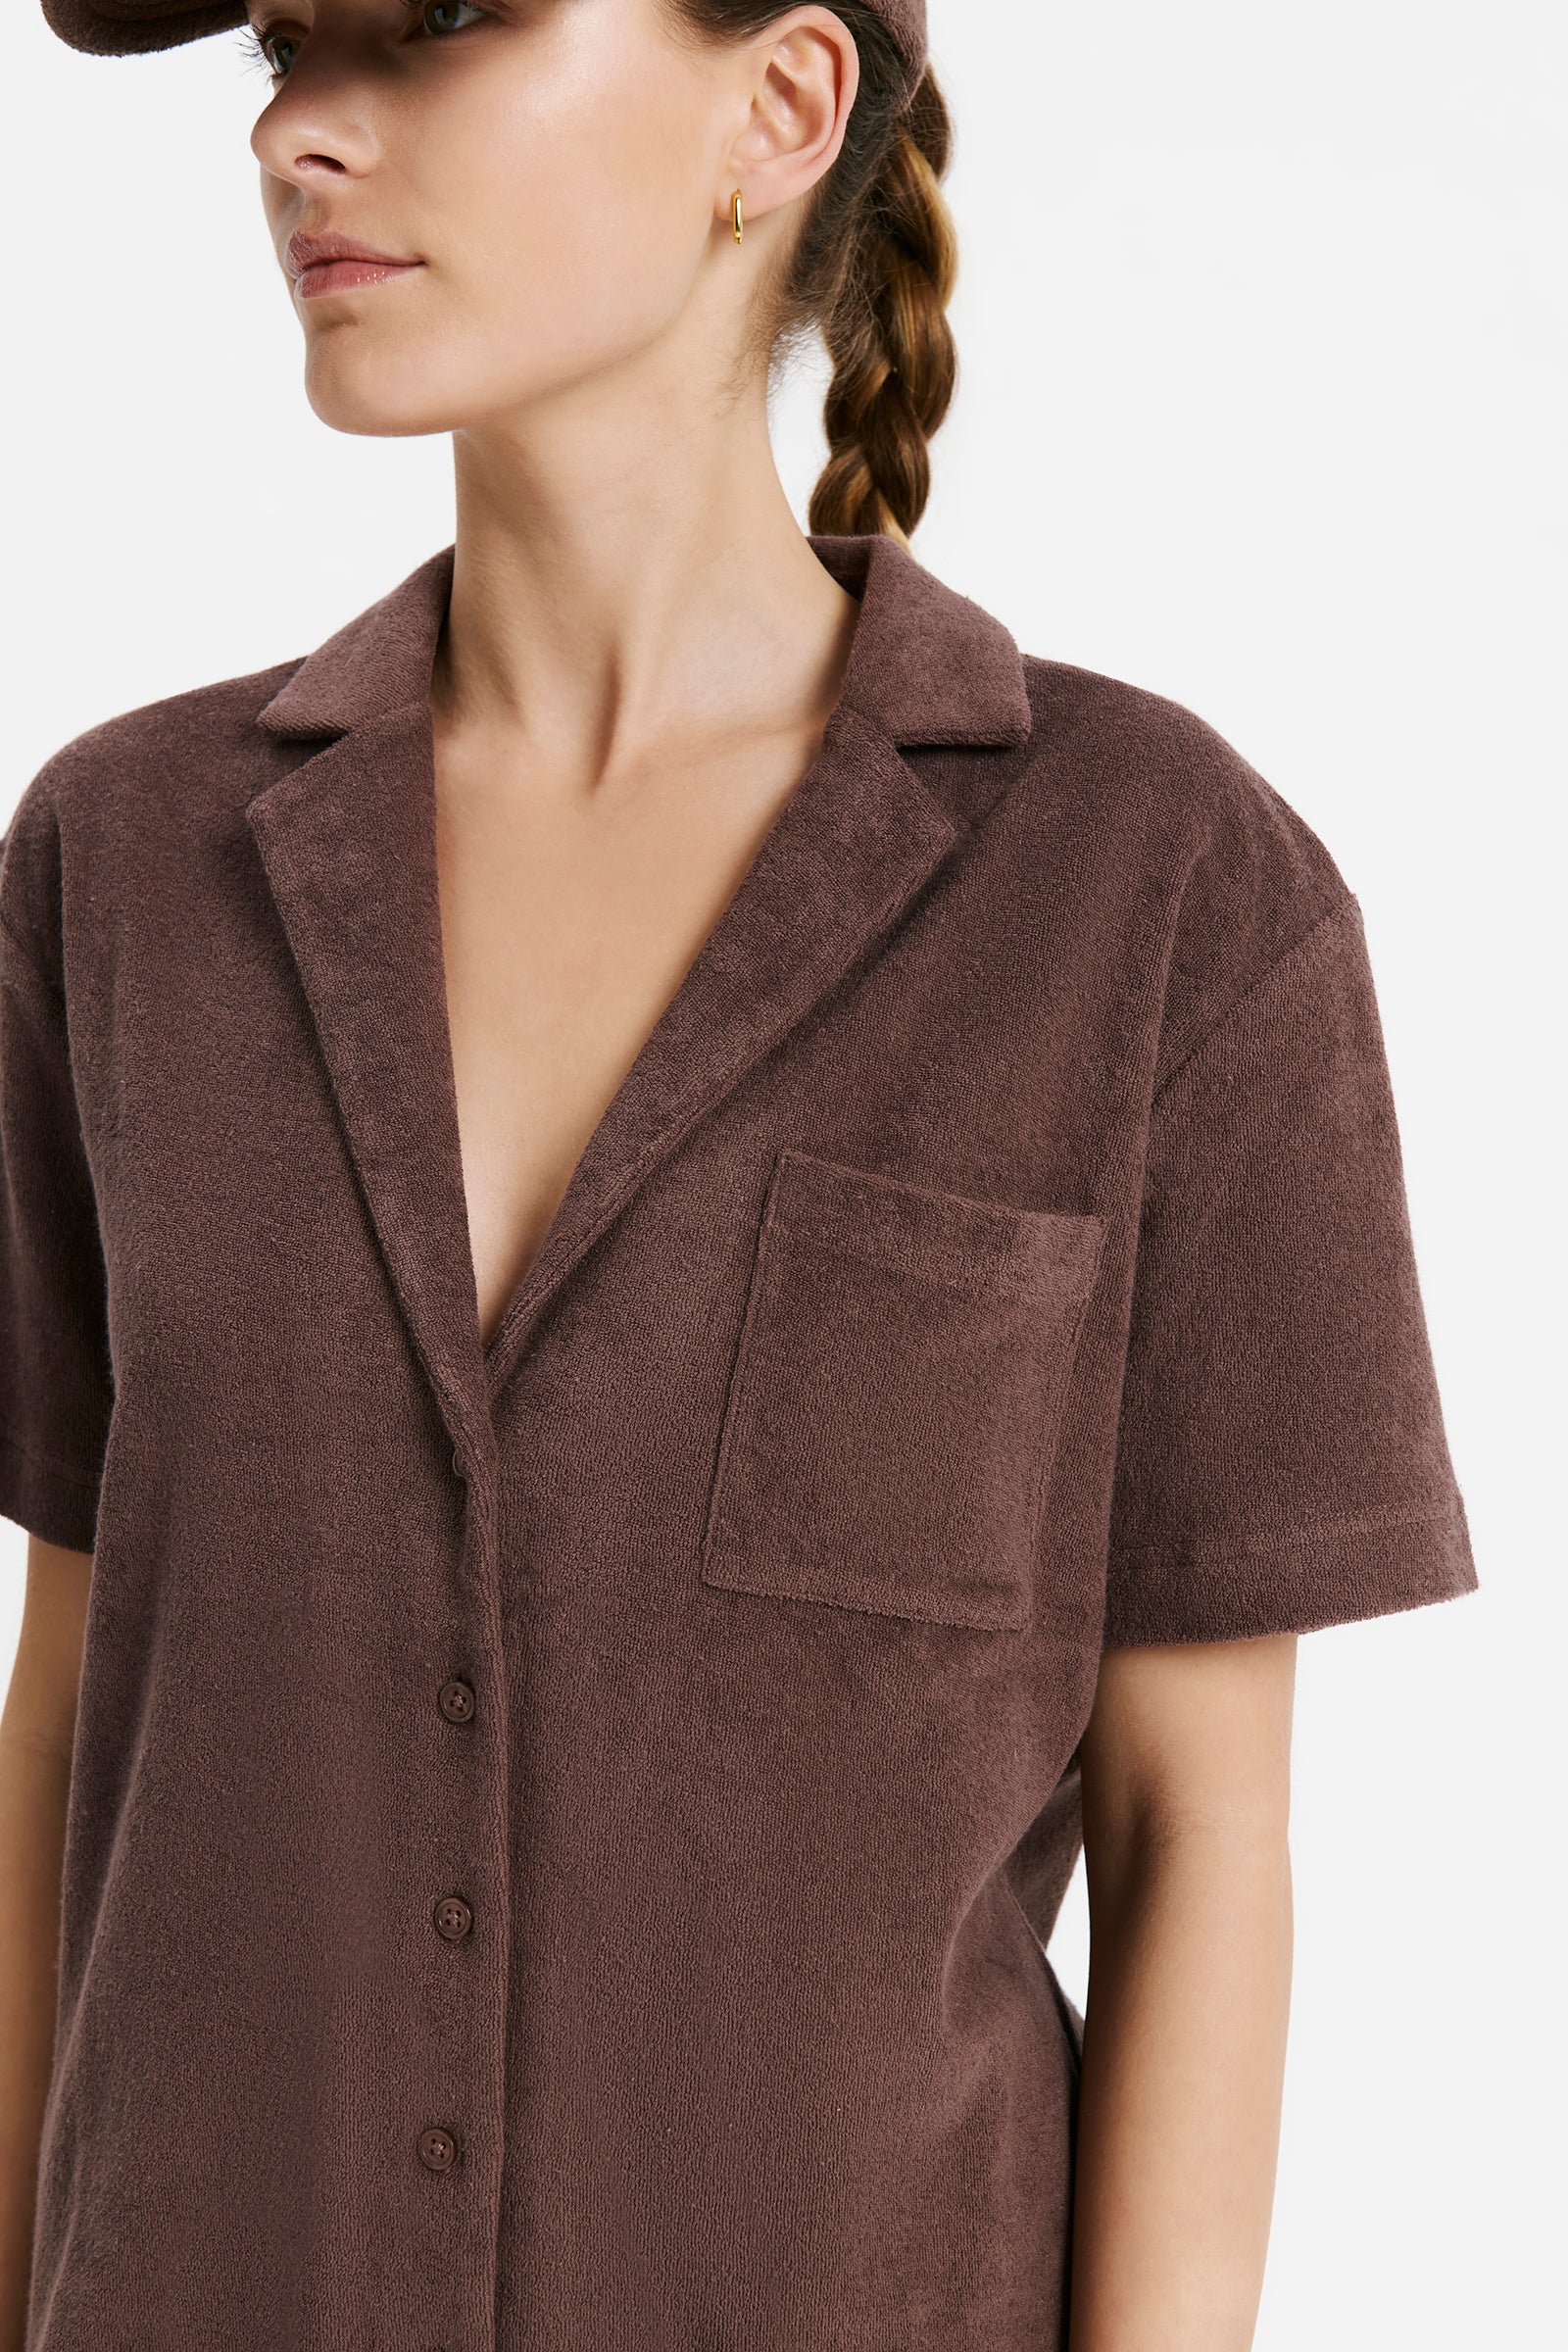 Nude Lucy Inka Terry Shirt in a Brown Chocolate Cacao Colour